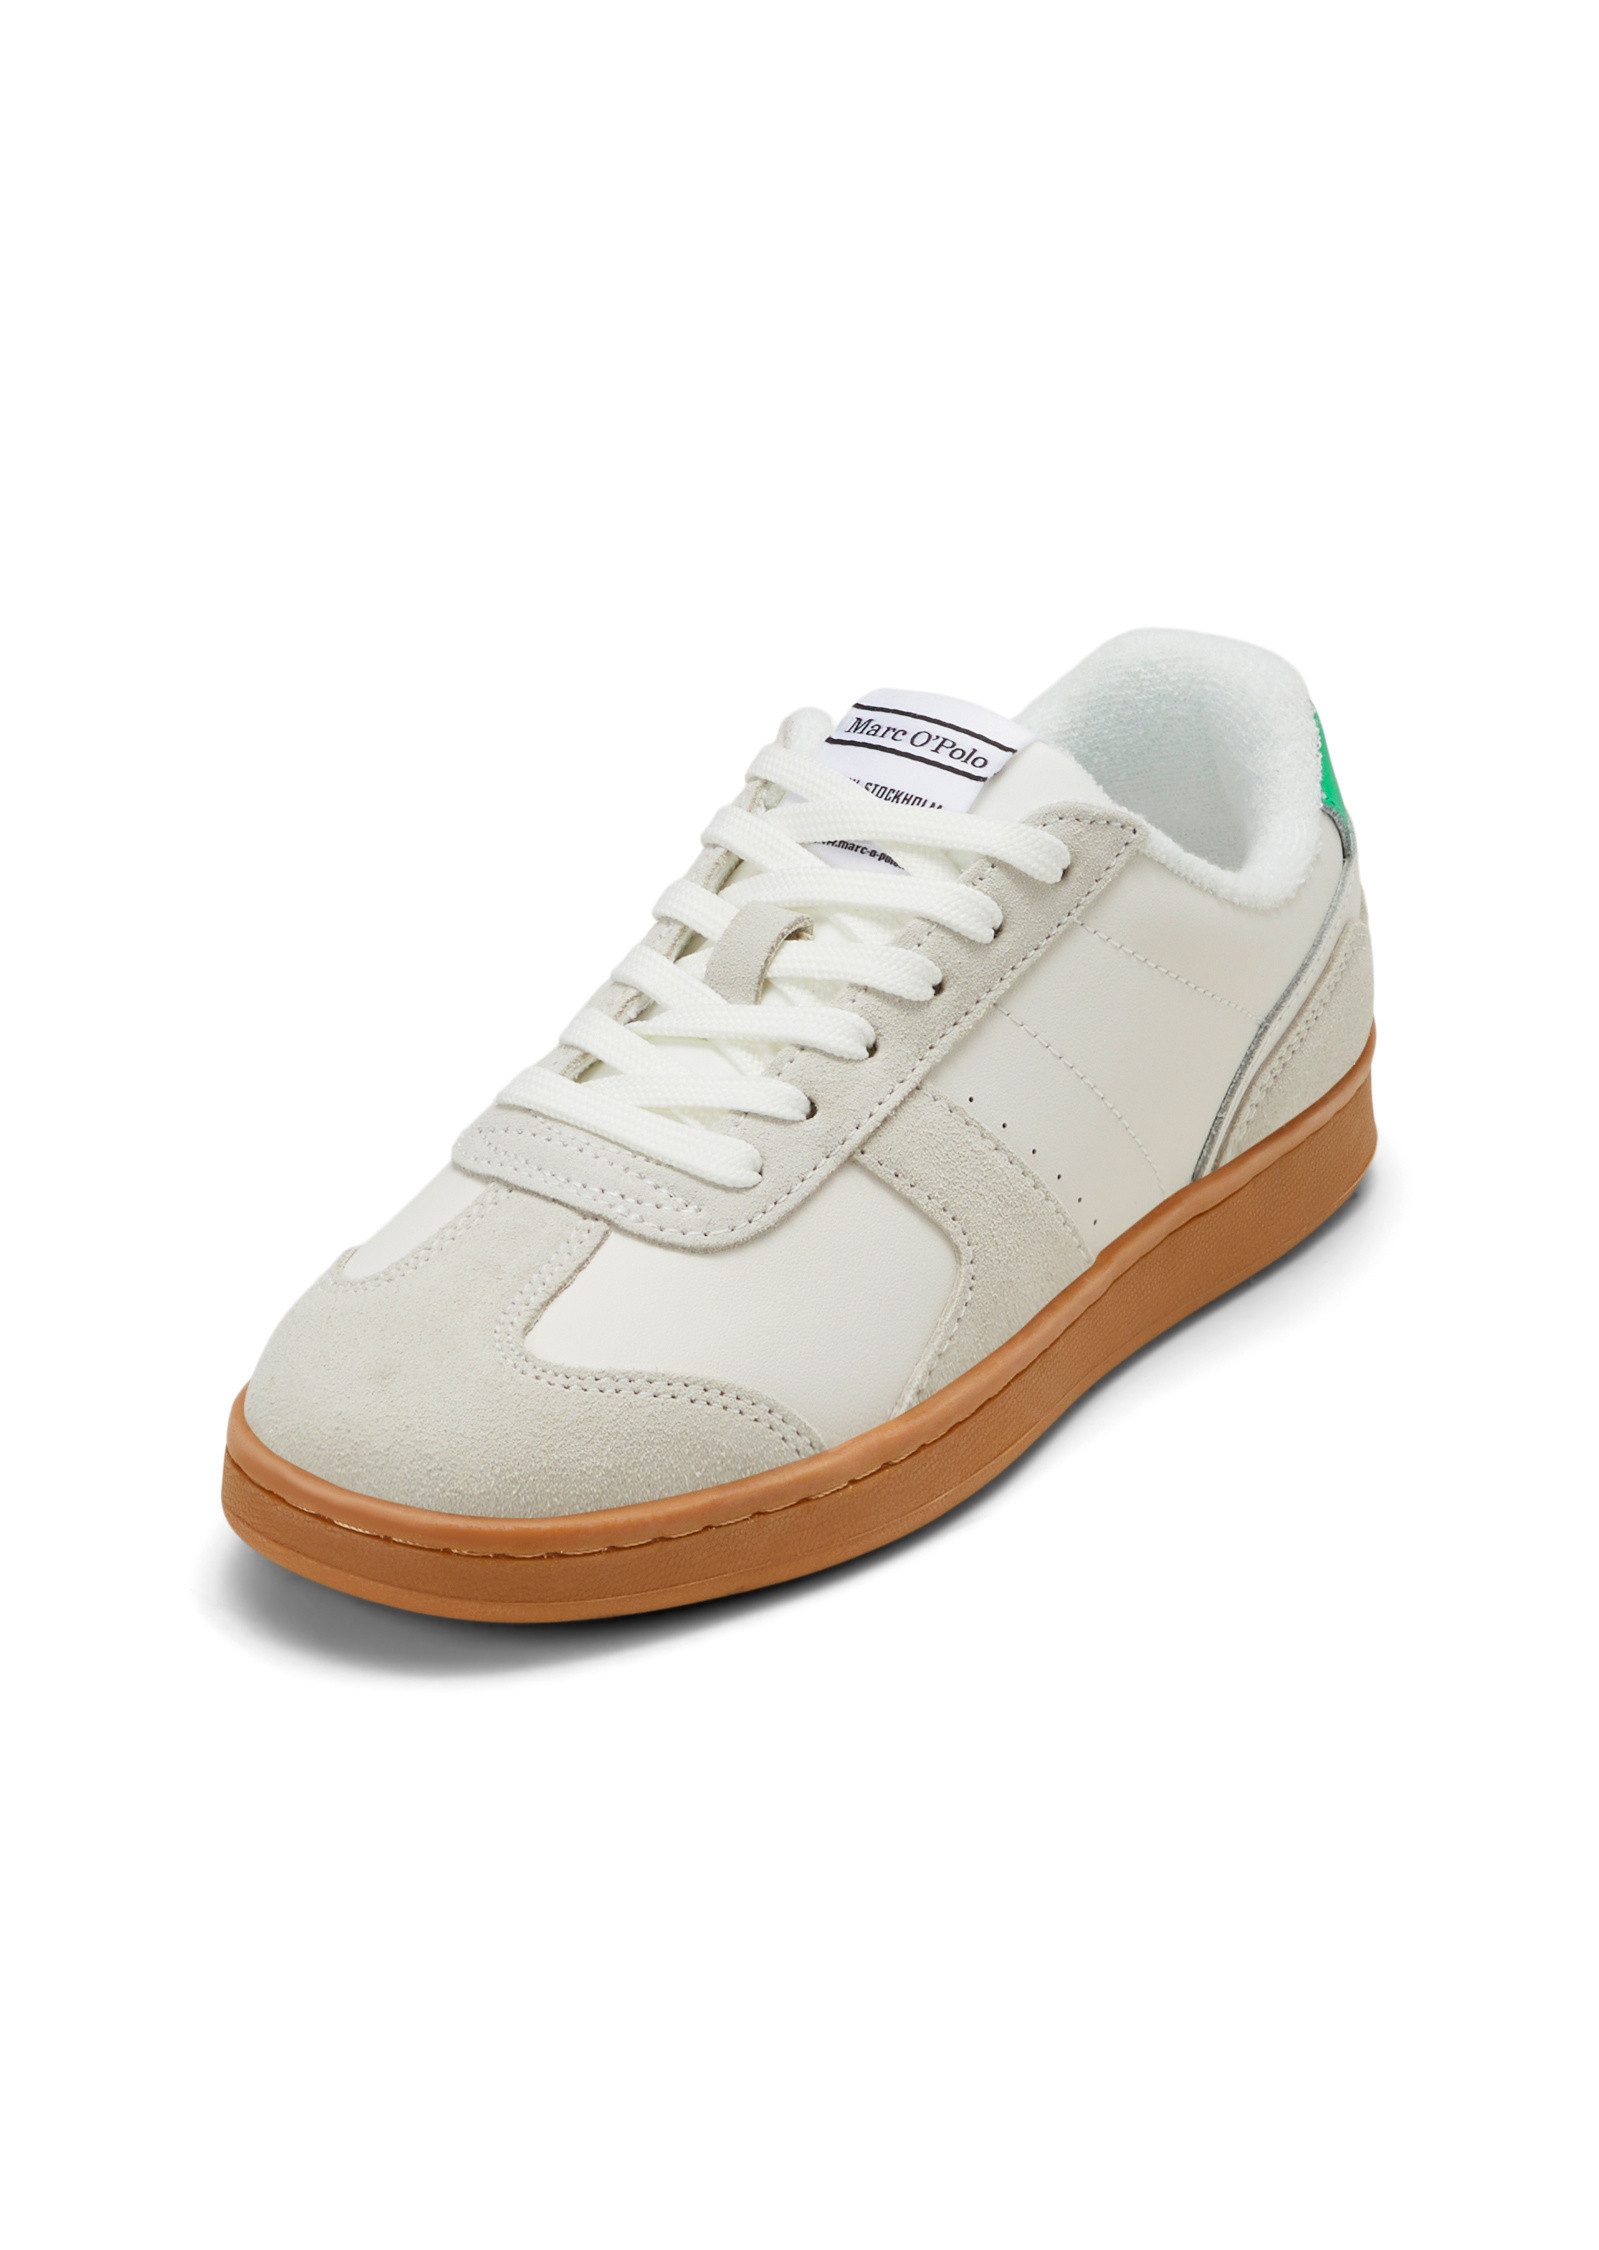 Marc O'Polo mit Frotteefutter Sneaker